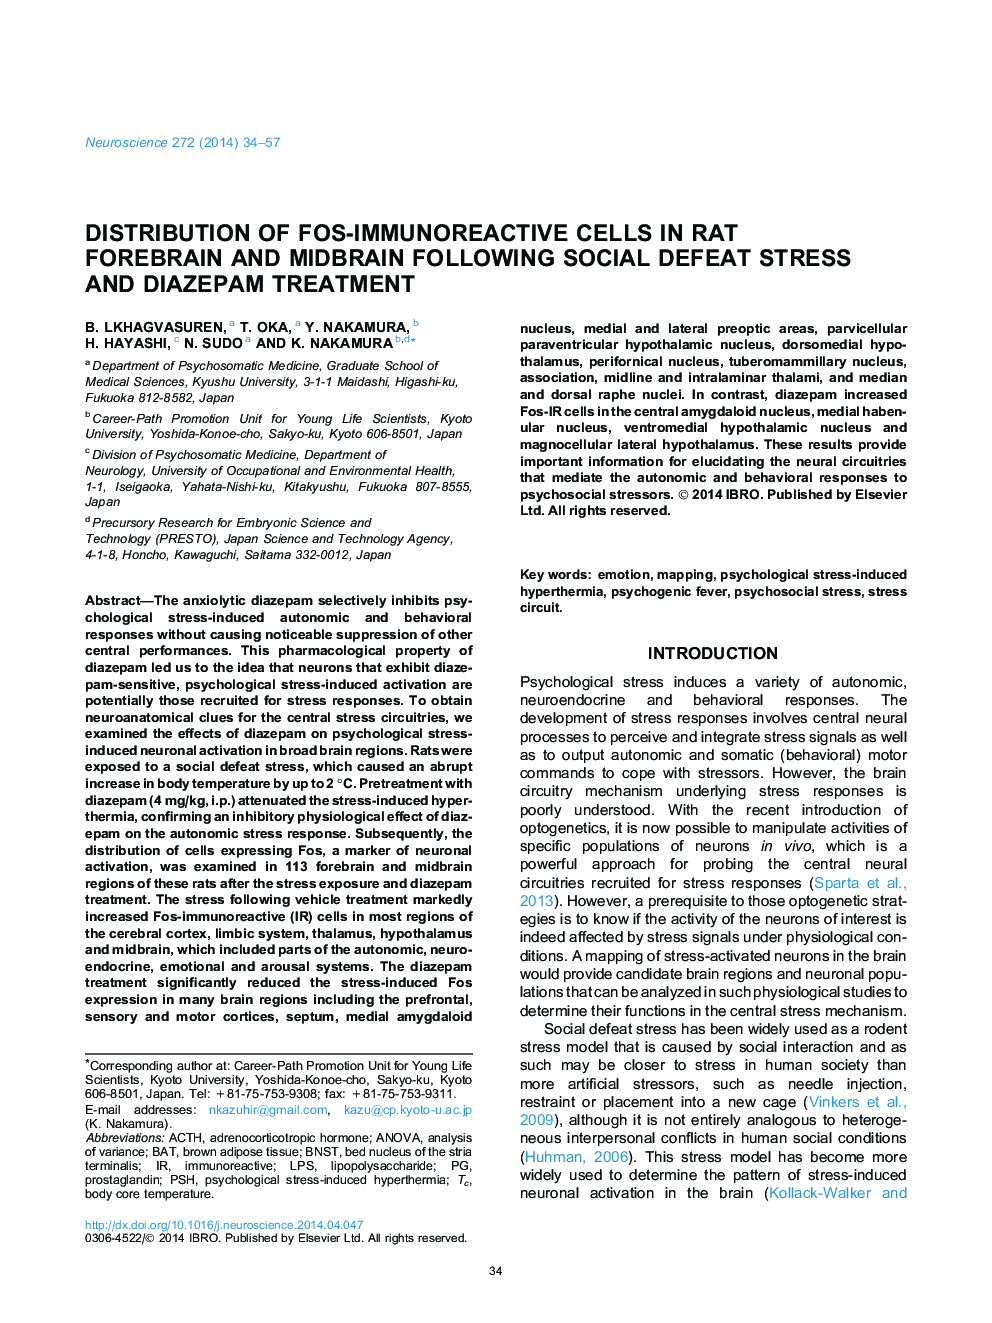 Distribution of Fos-immunoreactive cells in rat forebrain and midbrain following social defeat stress and diazepam treatment